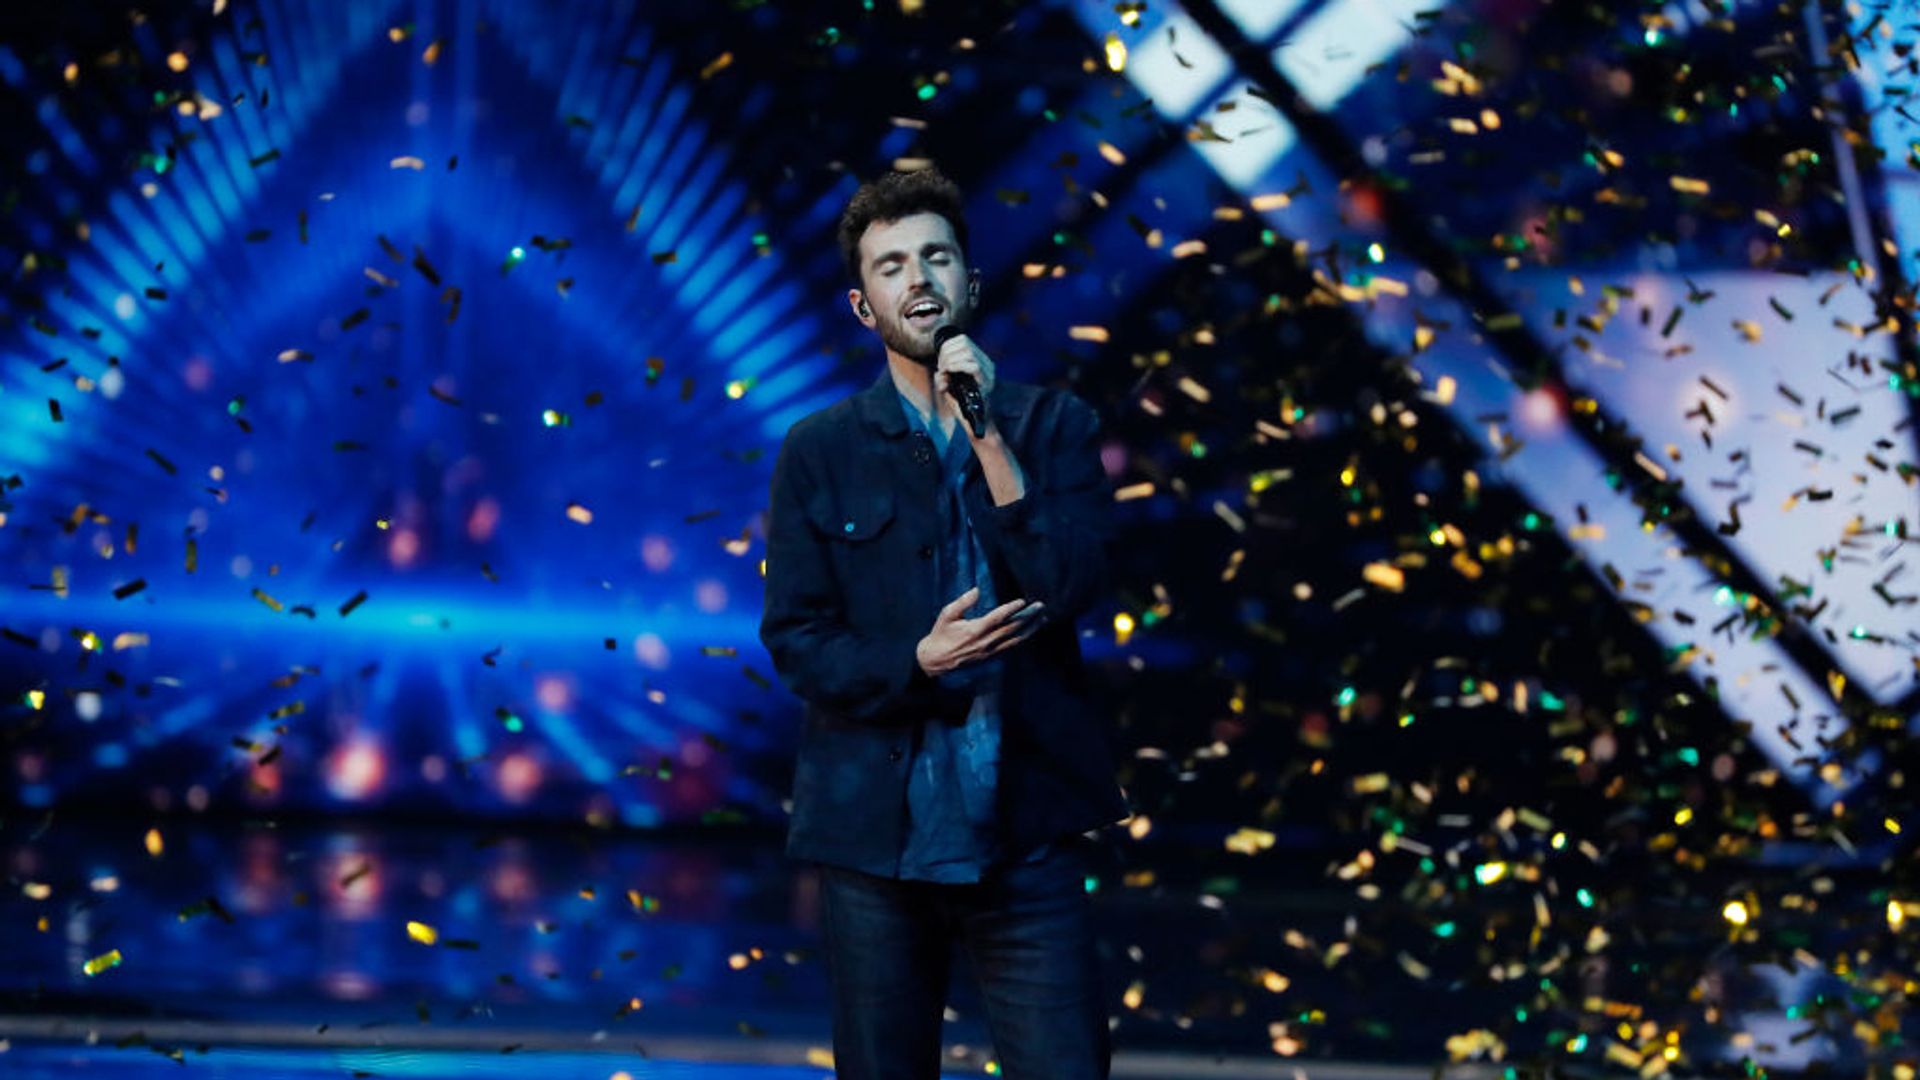 Duncan Laurence performs on stage at Eurovision 2019